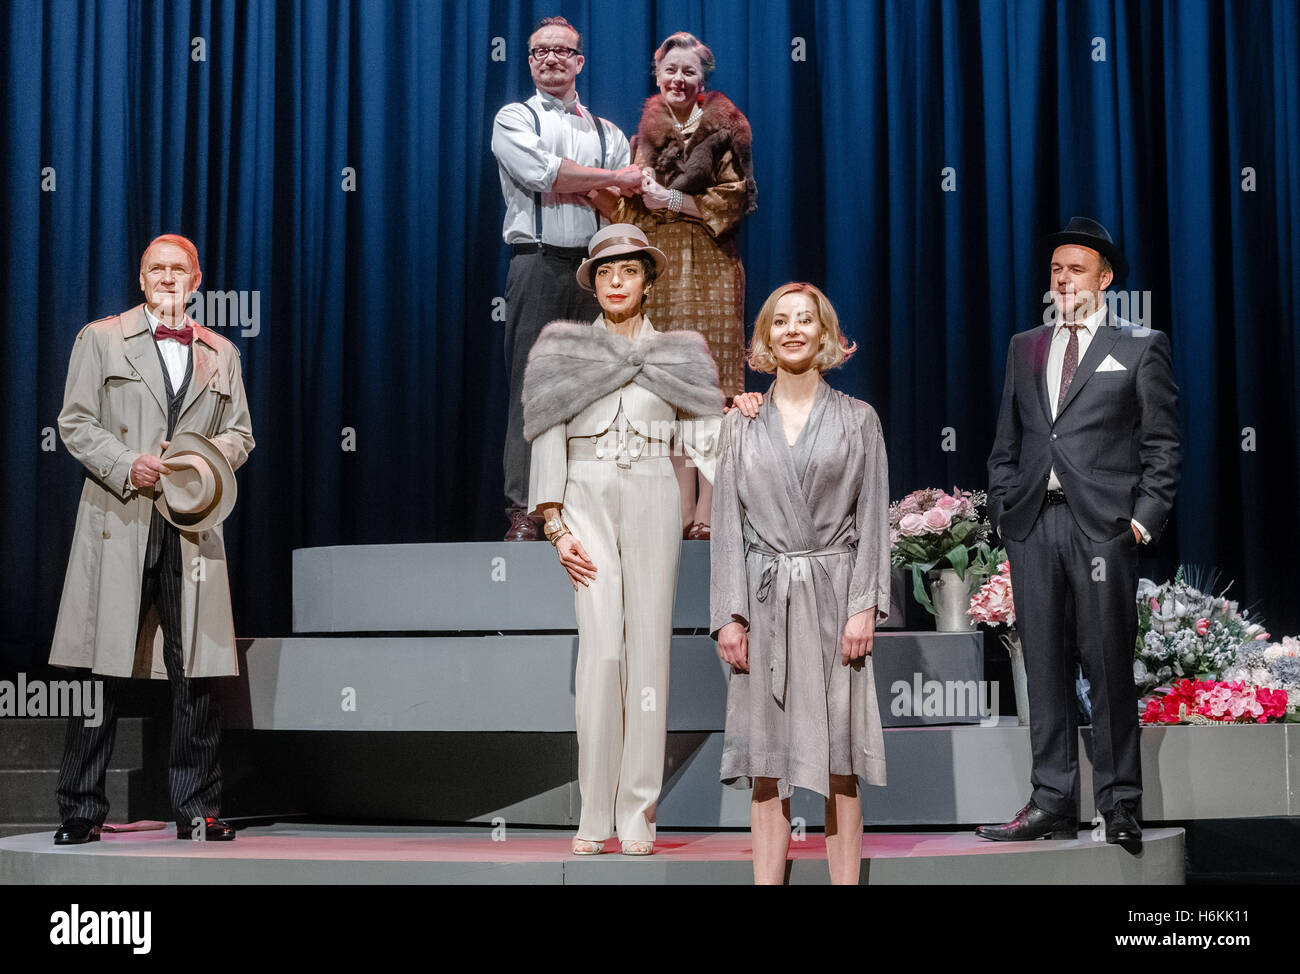 Hamburg, Germany. 27th Oct, 2016. Robin Brosch (L-R) as Hans, Tim Grobe as Kurt, Helen Schneider as Joan Ford, Isabell Fischer as Irene, Teresa Weissbach as Diana Schoening and Christoph Tomanek as Friedrich Licht act a scene from the play 'Diven' (lit. Divas) during a press rehearsal in Hamburg, Germany, 27 October 2016. The world premiere takes place on 30 October 2016 in the Hamburger Kammerspiele theater. Photo: MARKUS SCHOLZ/dpa/Alamy Live News Stock Photo